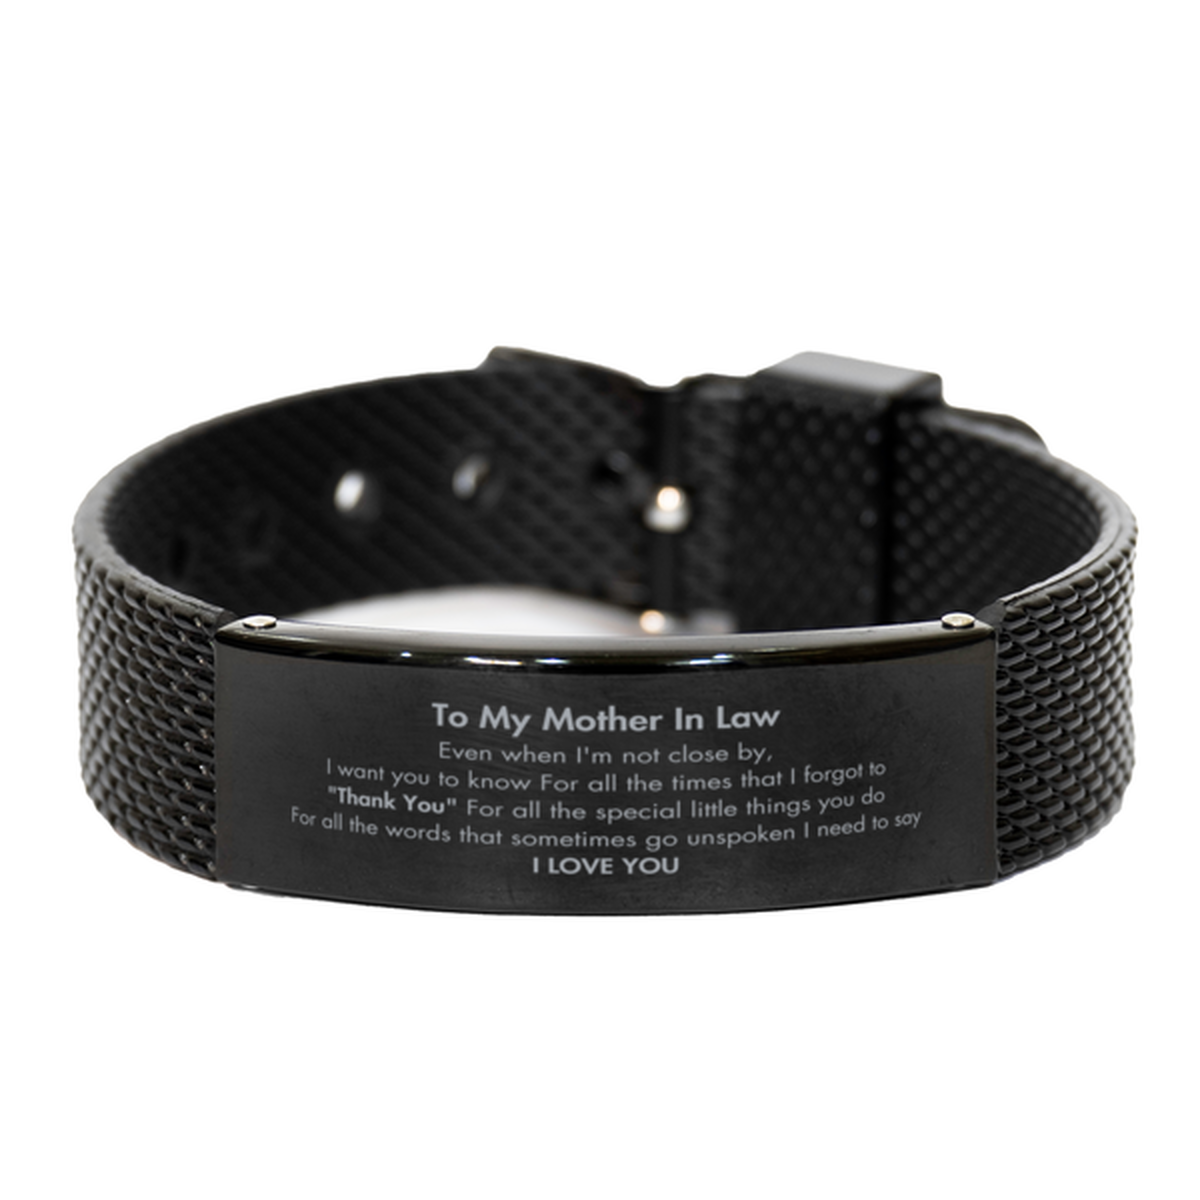 Thank You Gifts for Mother In Law, Keepsake Black Shark Mesh Bracelet Gifts for Mother In Law Birthday Mother's day Father's Day Mother In Law For all the words That sometimes go unspoken I need to say I LOVE YOU